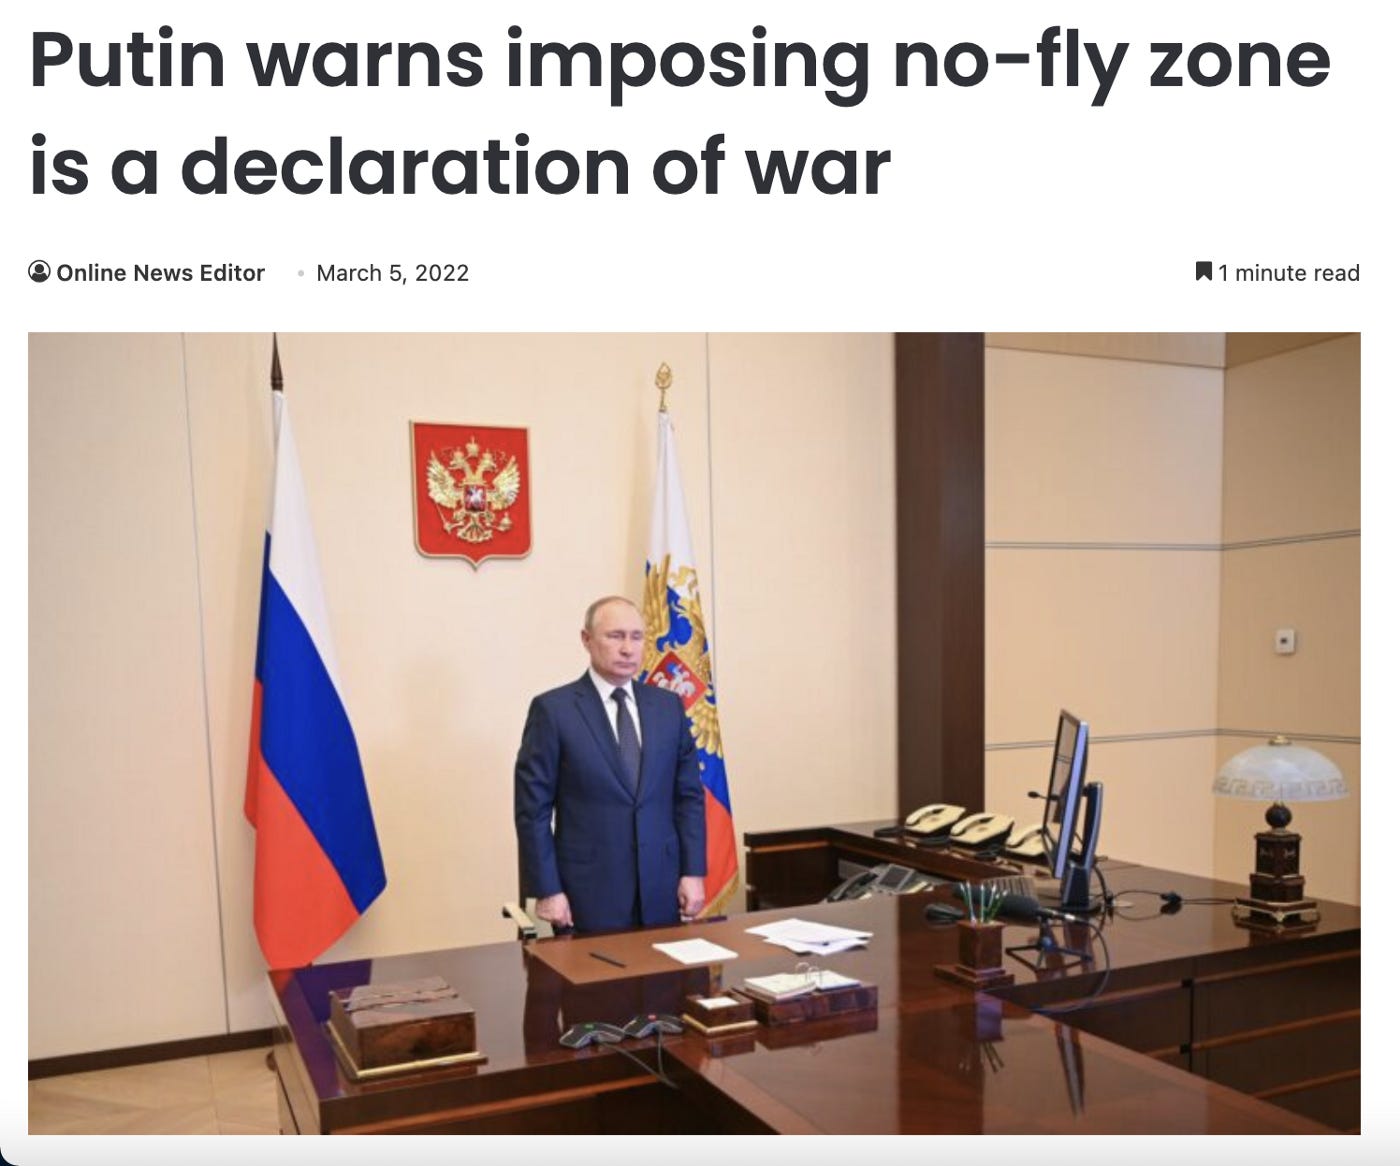 Image description: Putin stands in an office, flanked by two flags of Russia, with the Russian coat of arms behind him. He is wearing a dark blue suit and is standing straight with his hands at his sides, facing forwards. Headline above picture is black text on a white background that reads: “Putin warns imposing no-fly zone is a declaration of war”. Article is dated “March 5, 2022” beneath.